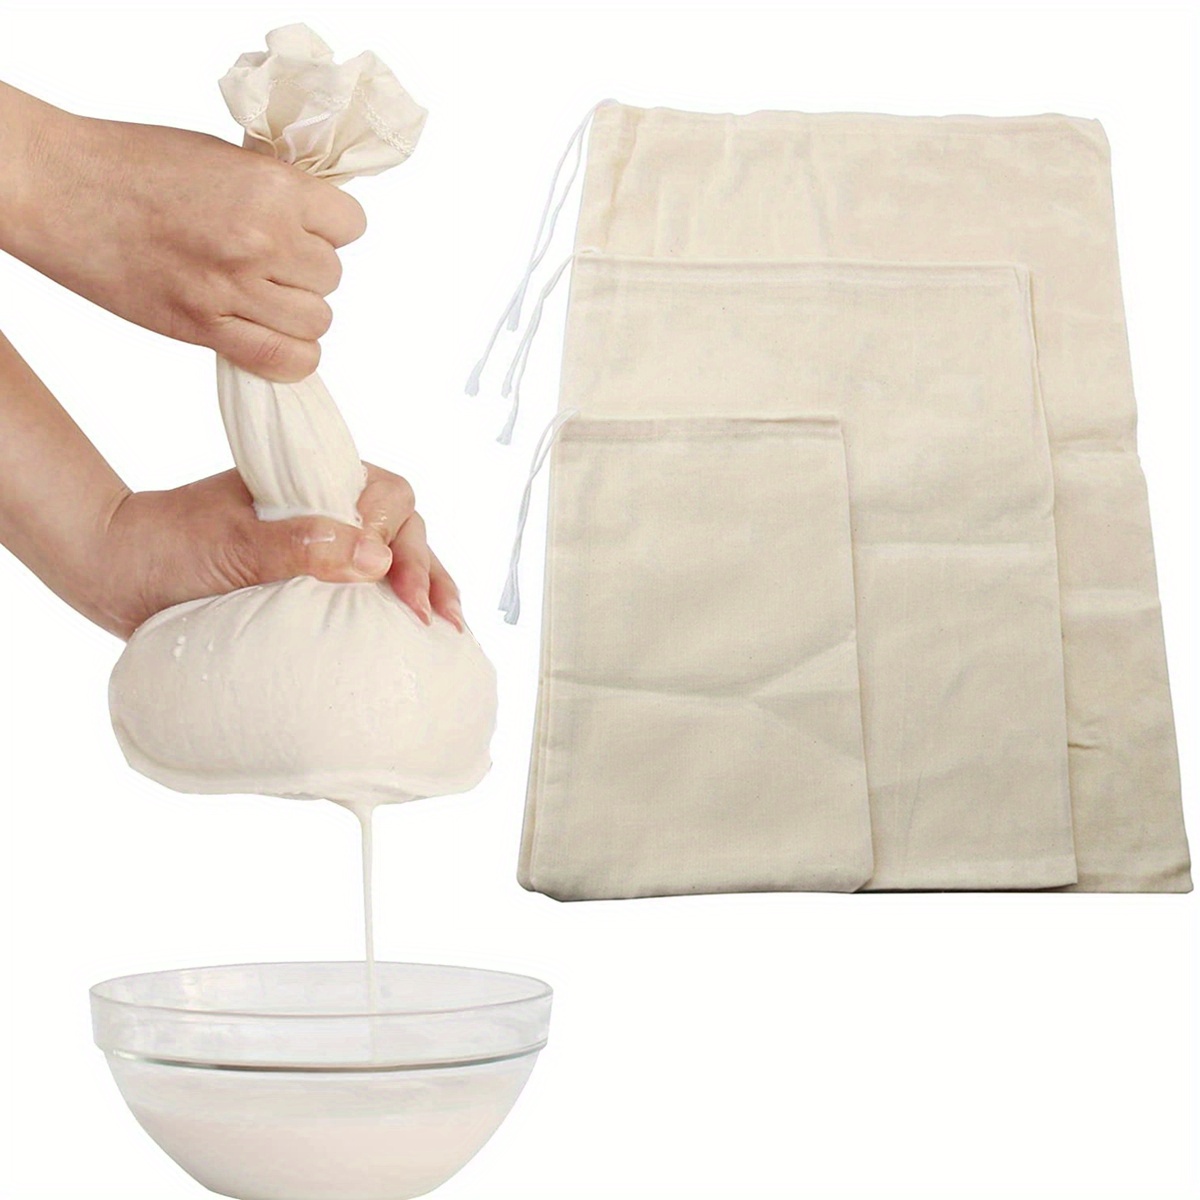 WUD Reusable Unbleached Muslin Cloth Bags for Straining Juice,Spice Bag  Pack of 10 Strainer Price in India - Buy WUD Reusable Unbleached Muslin  Cloth Bags for Straining Juice,Spice Bag Pack of 10